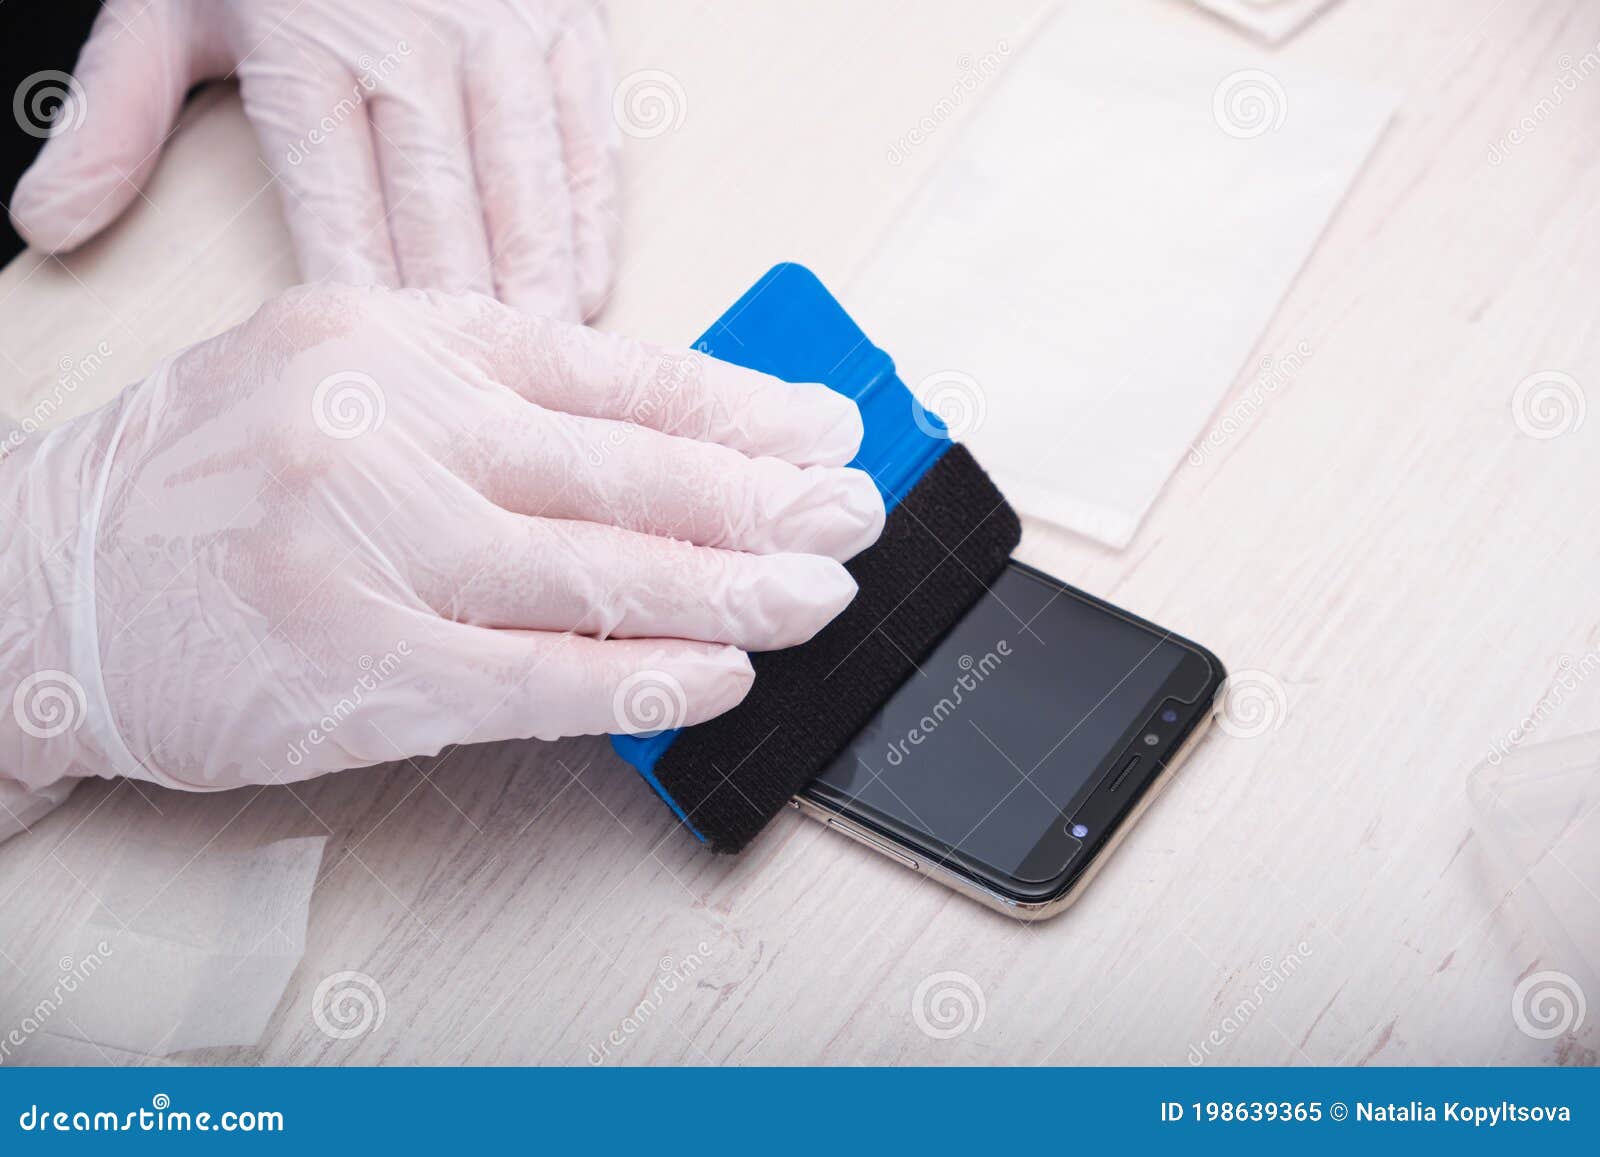 man in rubber gloves glues a protective glass to a smartphone using a special palstic spatula with a soft nozzle